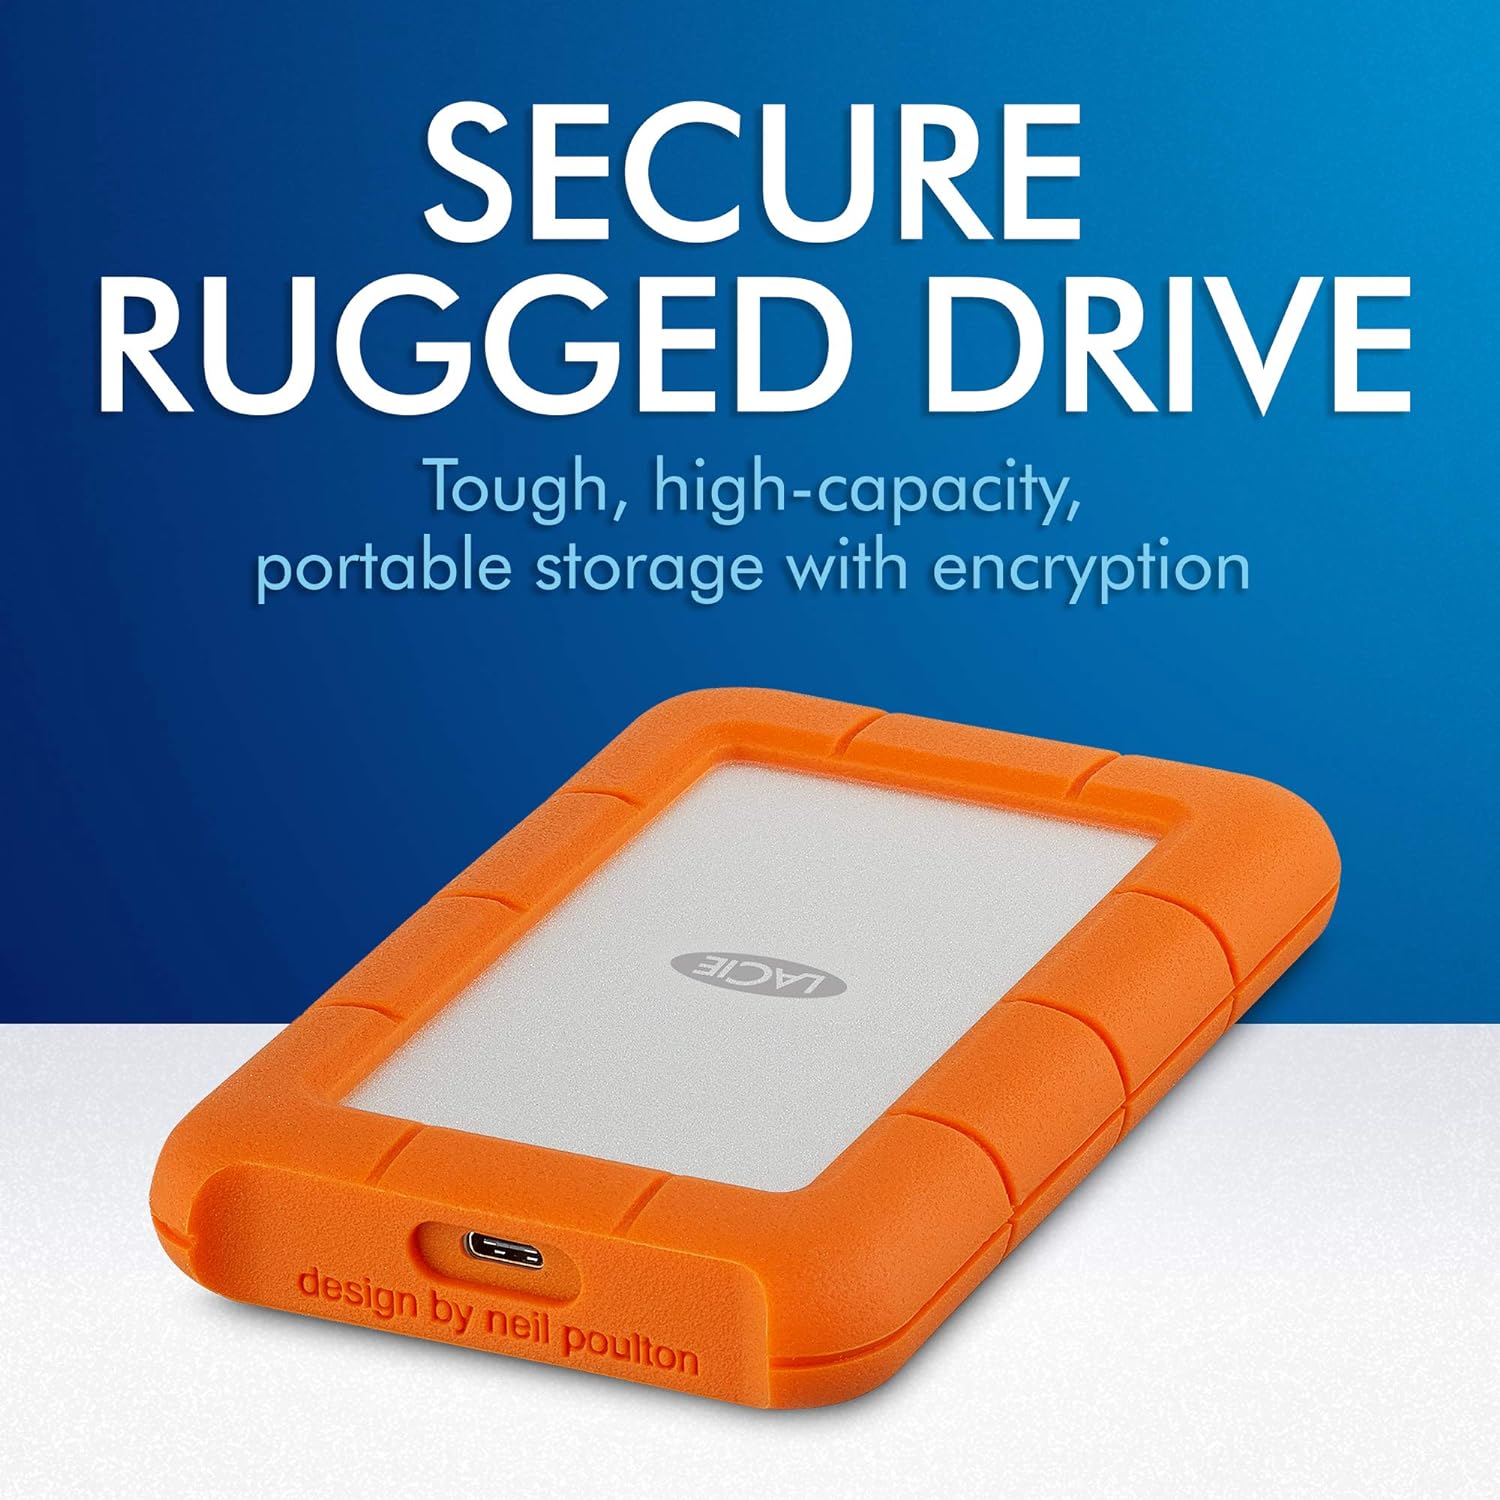 LaCie Rugged Secure 2TB External Hard Drive Portable Model STFR2000403